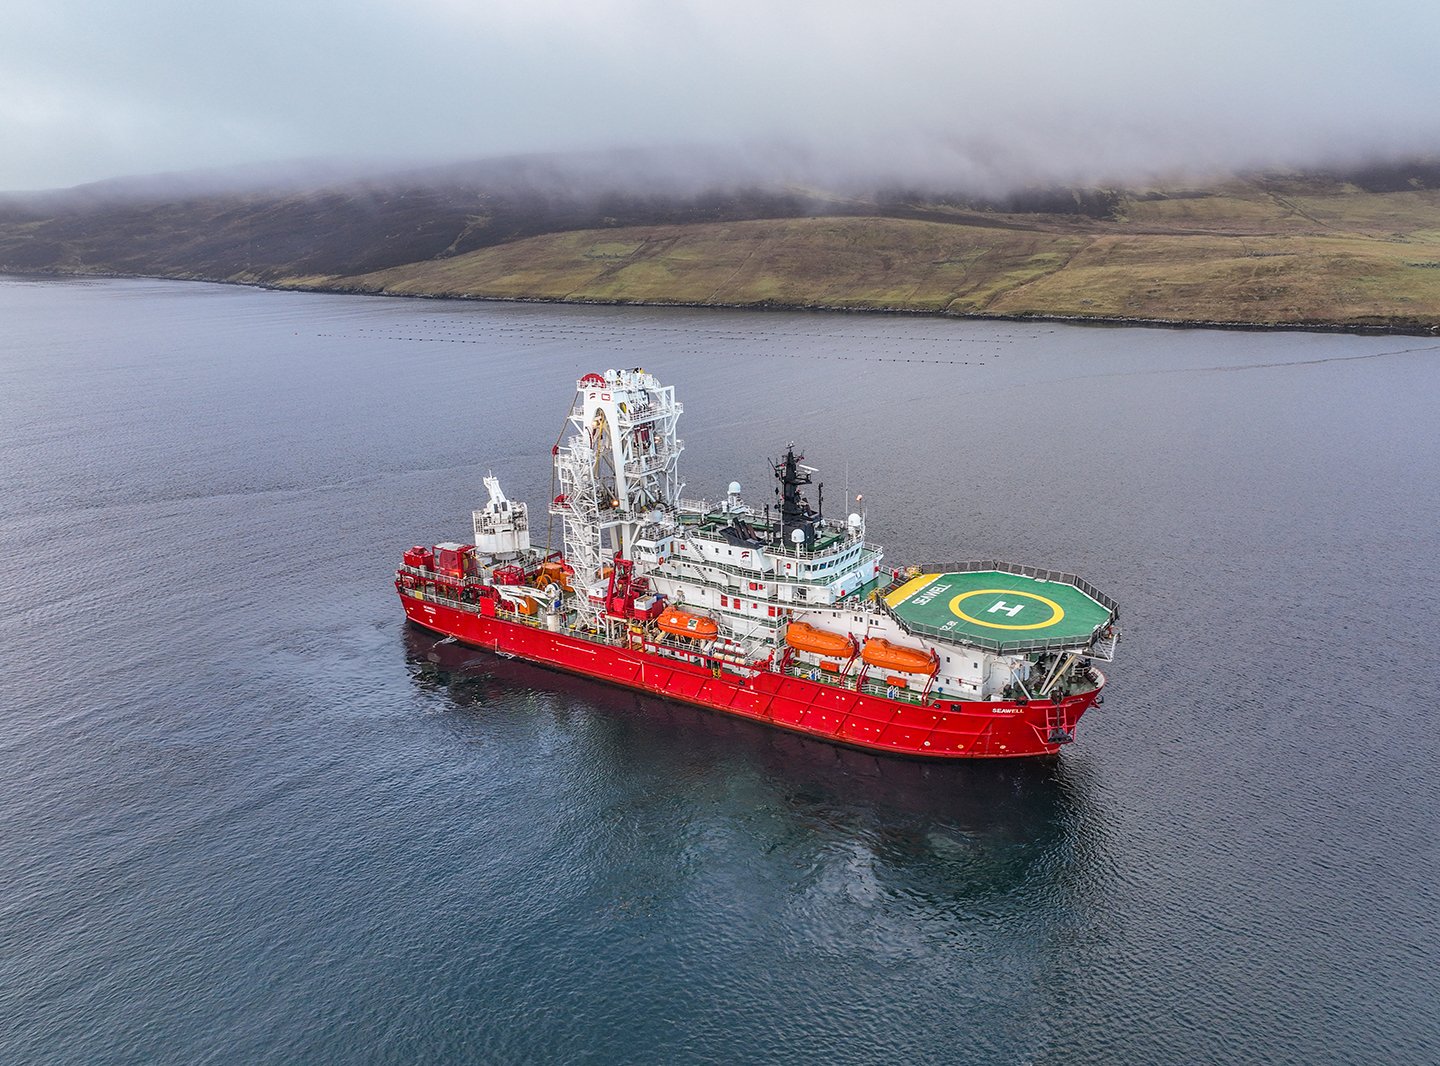 ssen-transmission_specialist-vessel-seawell-has-played-a-major-role-in-the-shetland-hvdc-link-project_credit-to-calum-fraser-photography.jpg